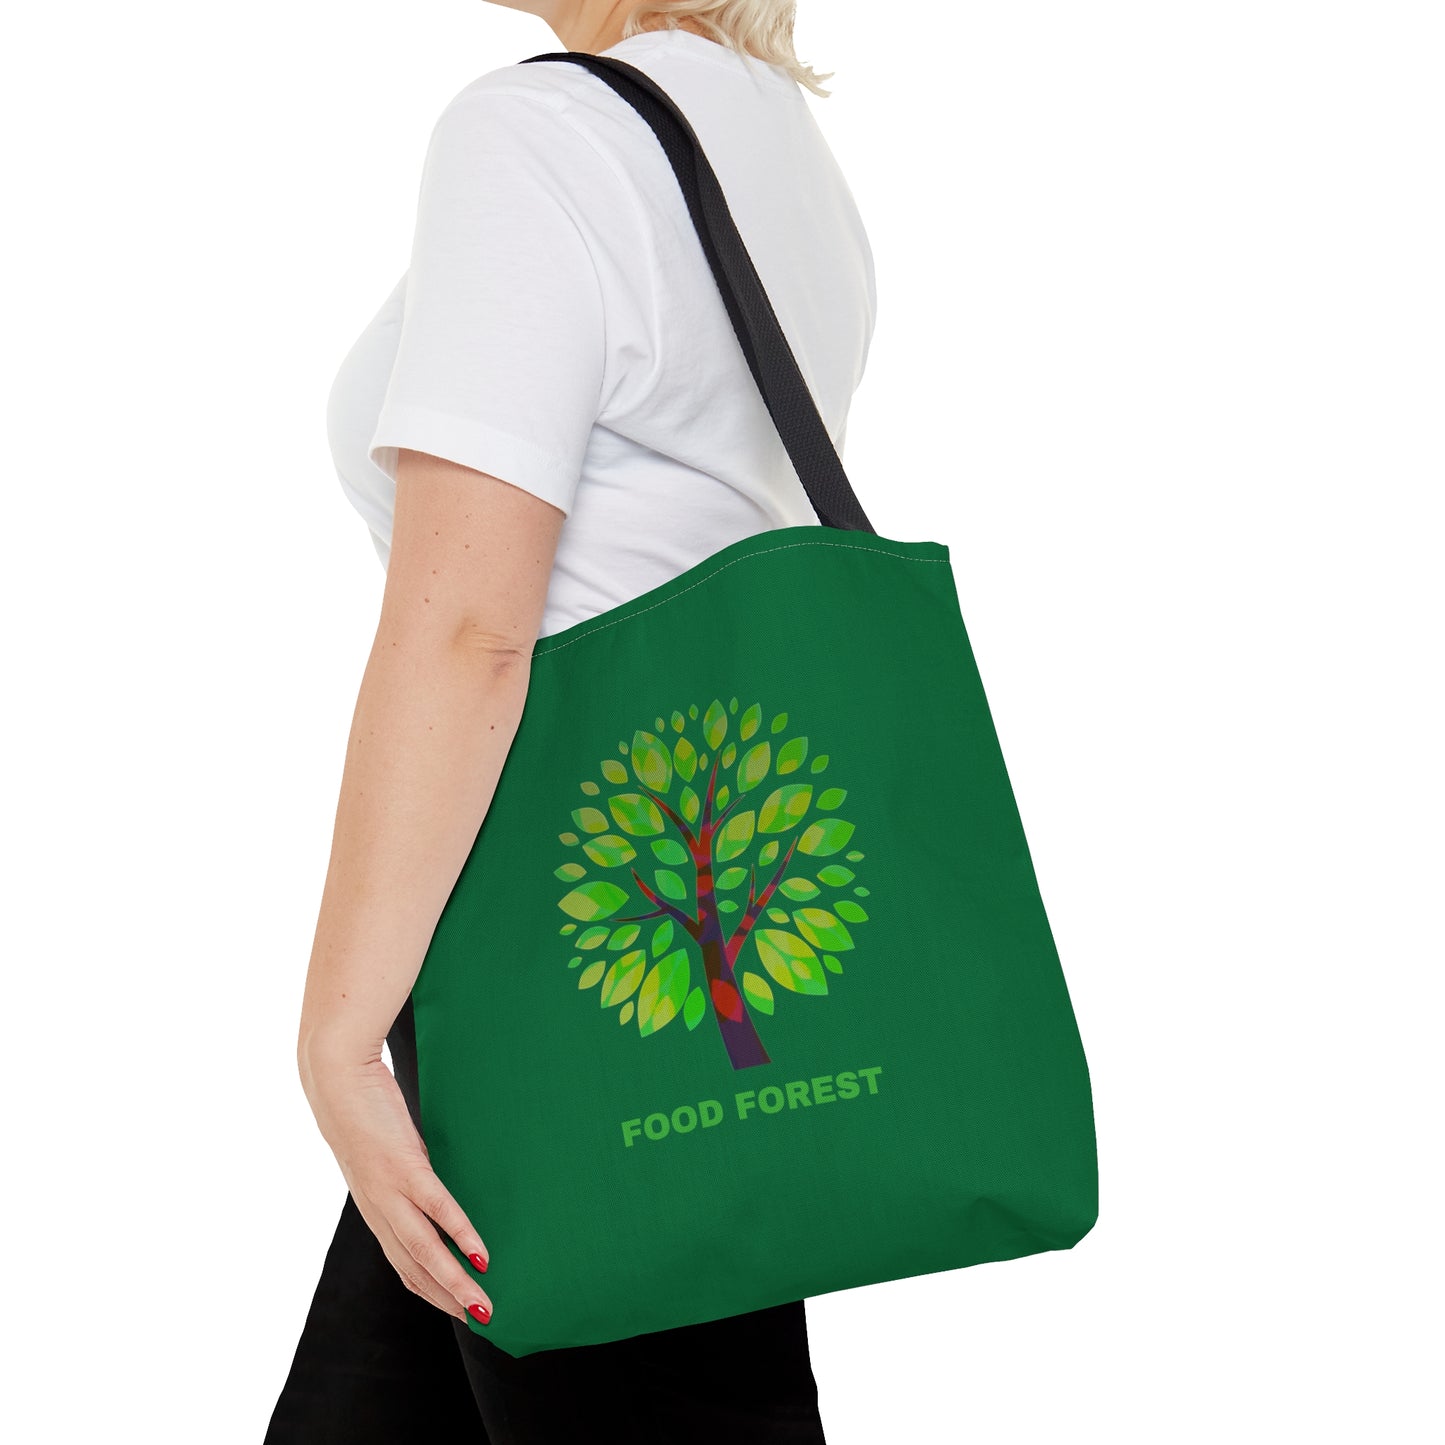 FOOD FOREST Tote Bag, Green